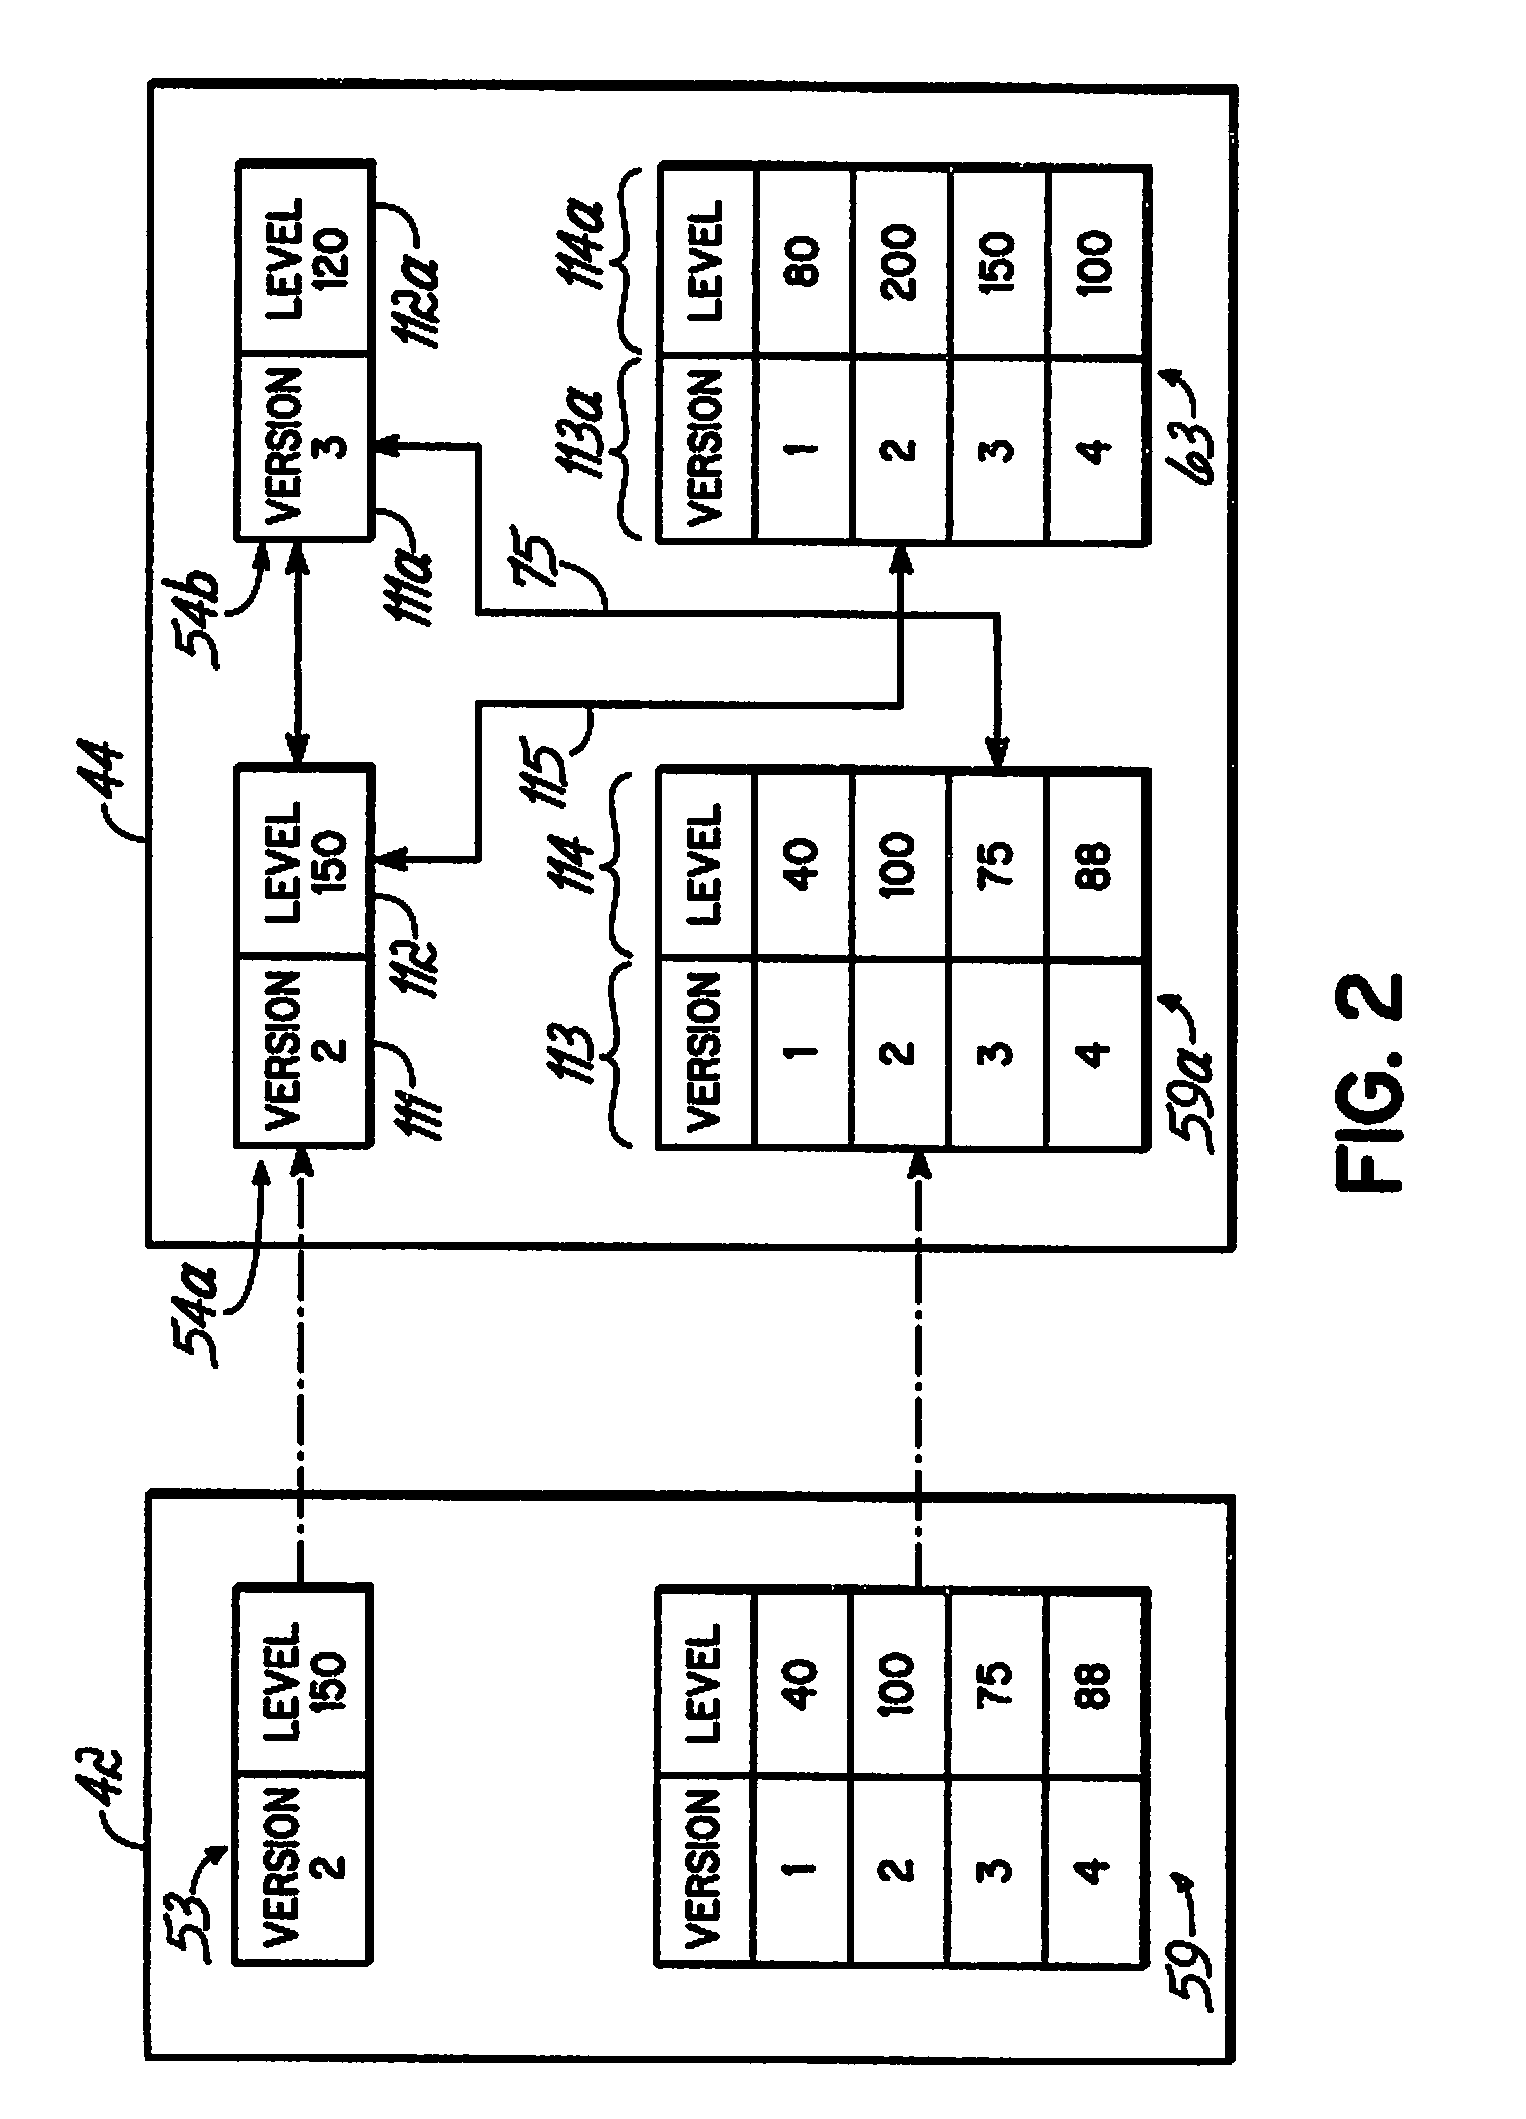 System and Method for Determining Firmware Compatibility for Migrating Logical Partitions